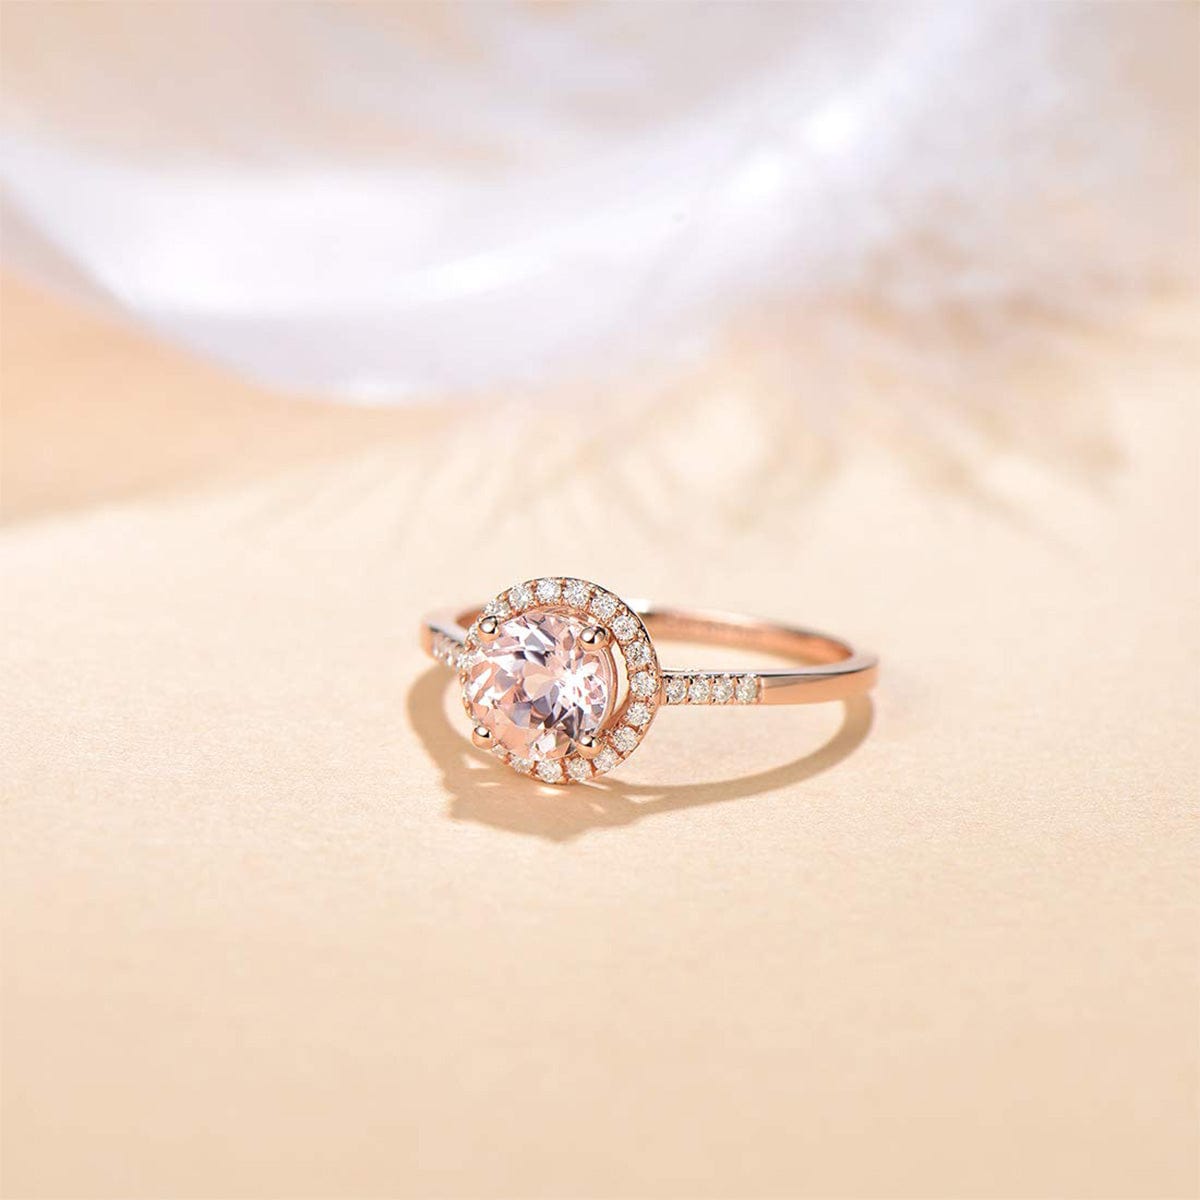 FANCIME Diamond Halo14K Solid Rose Gold Ring Show